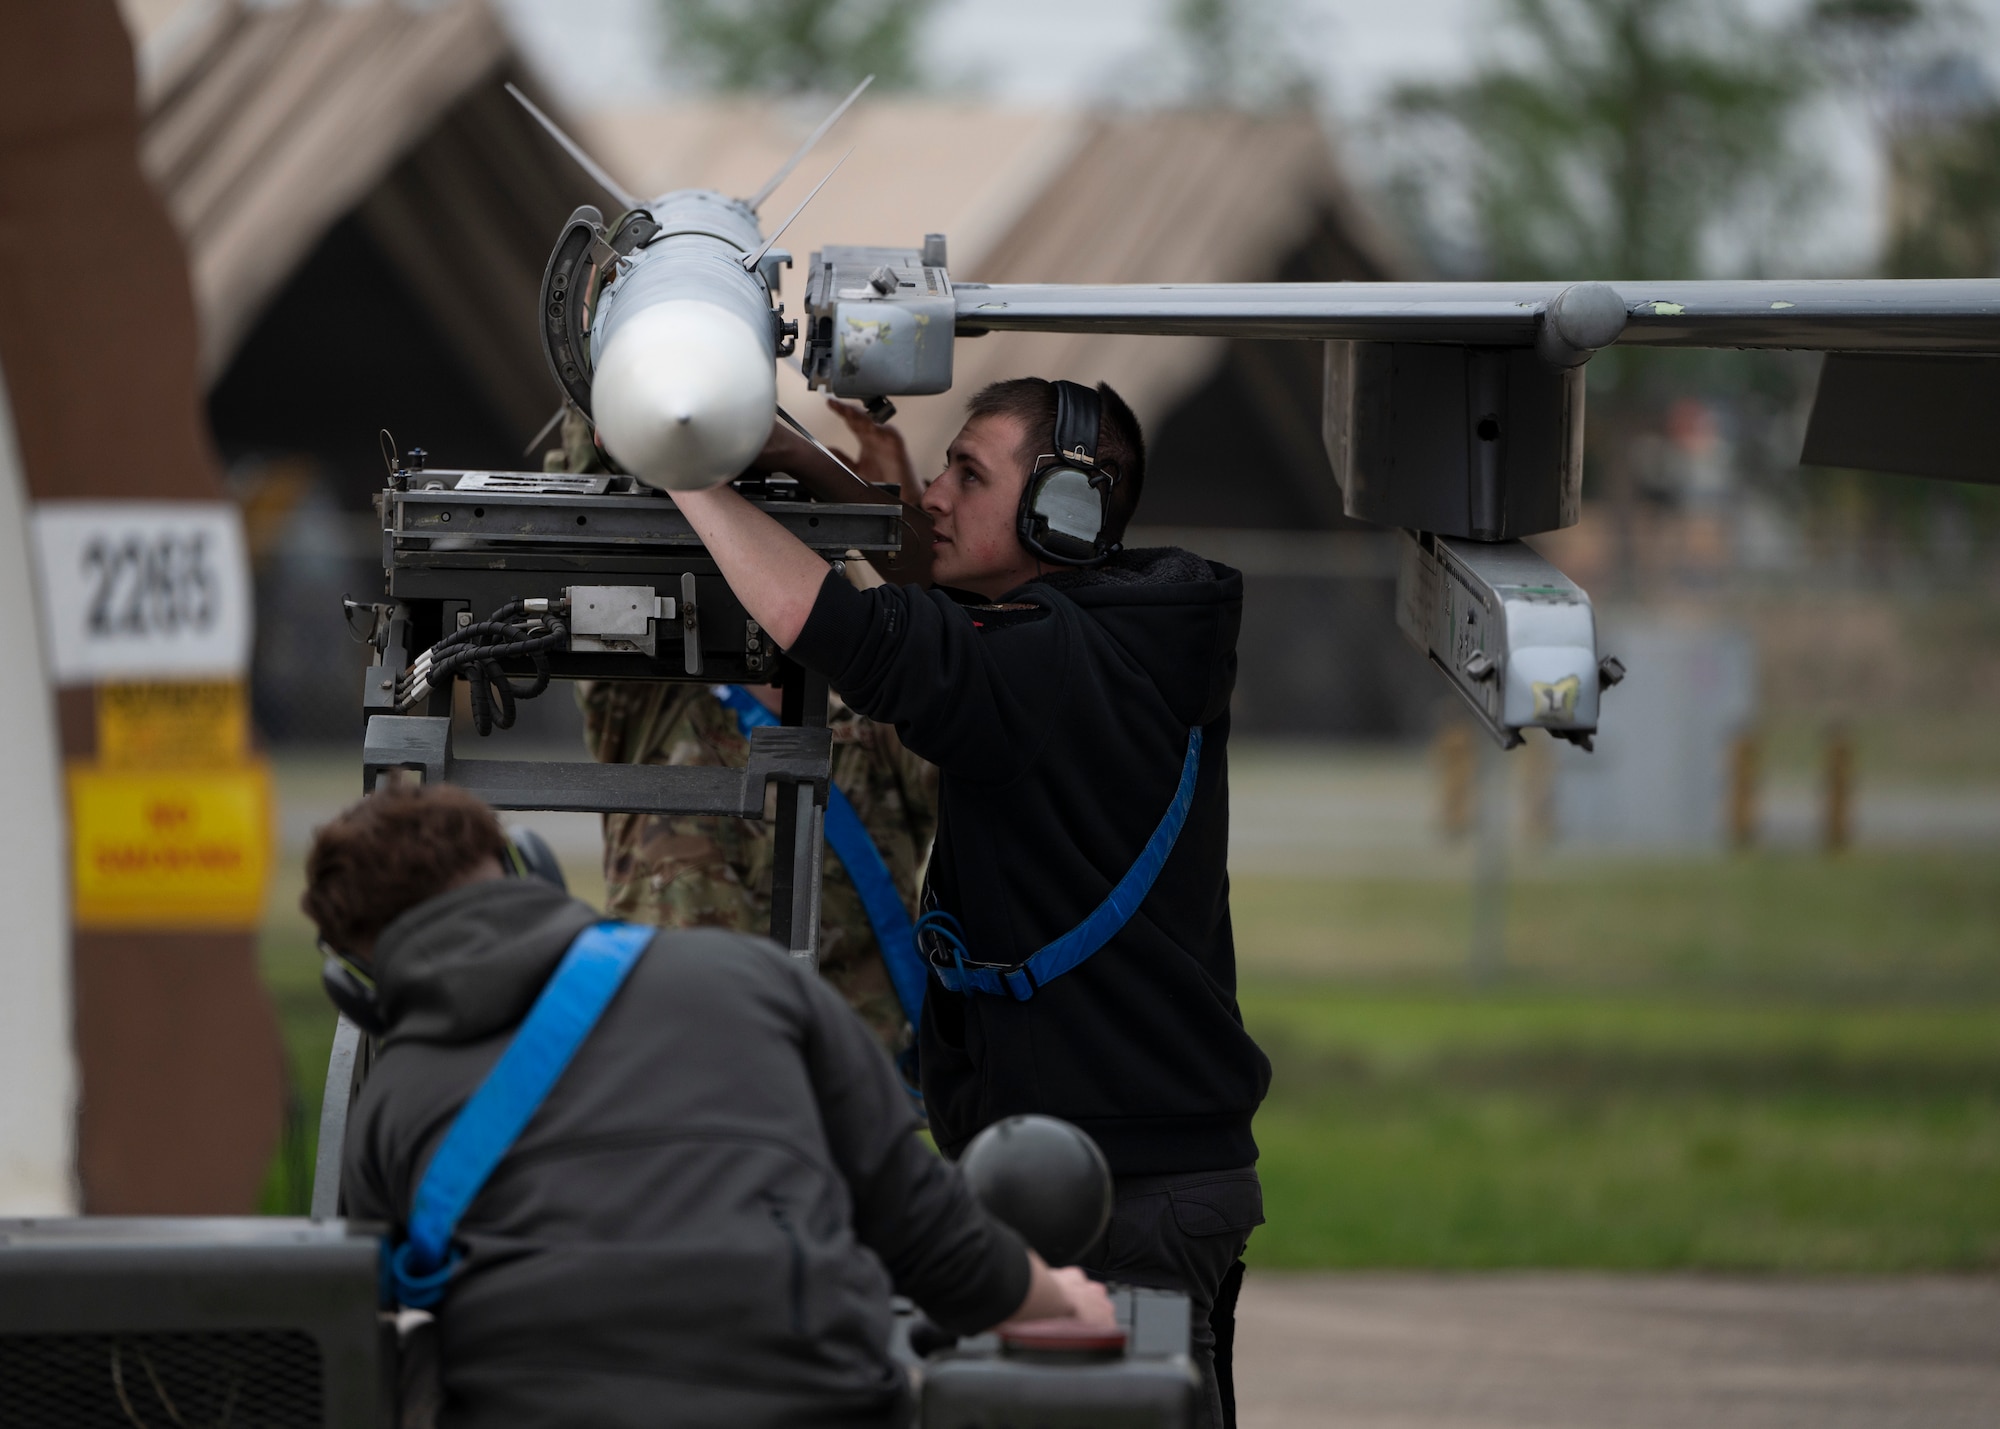 A side profile of two maintainers loading a munition onto a jet wing